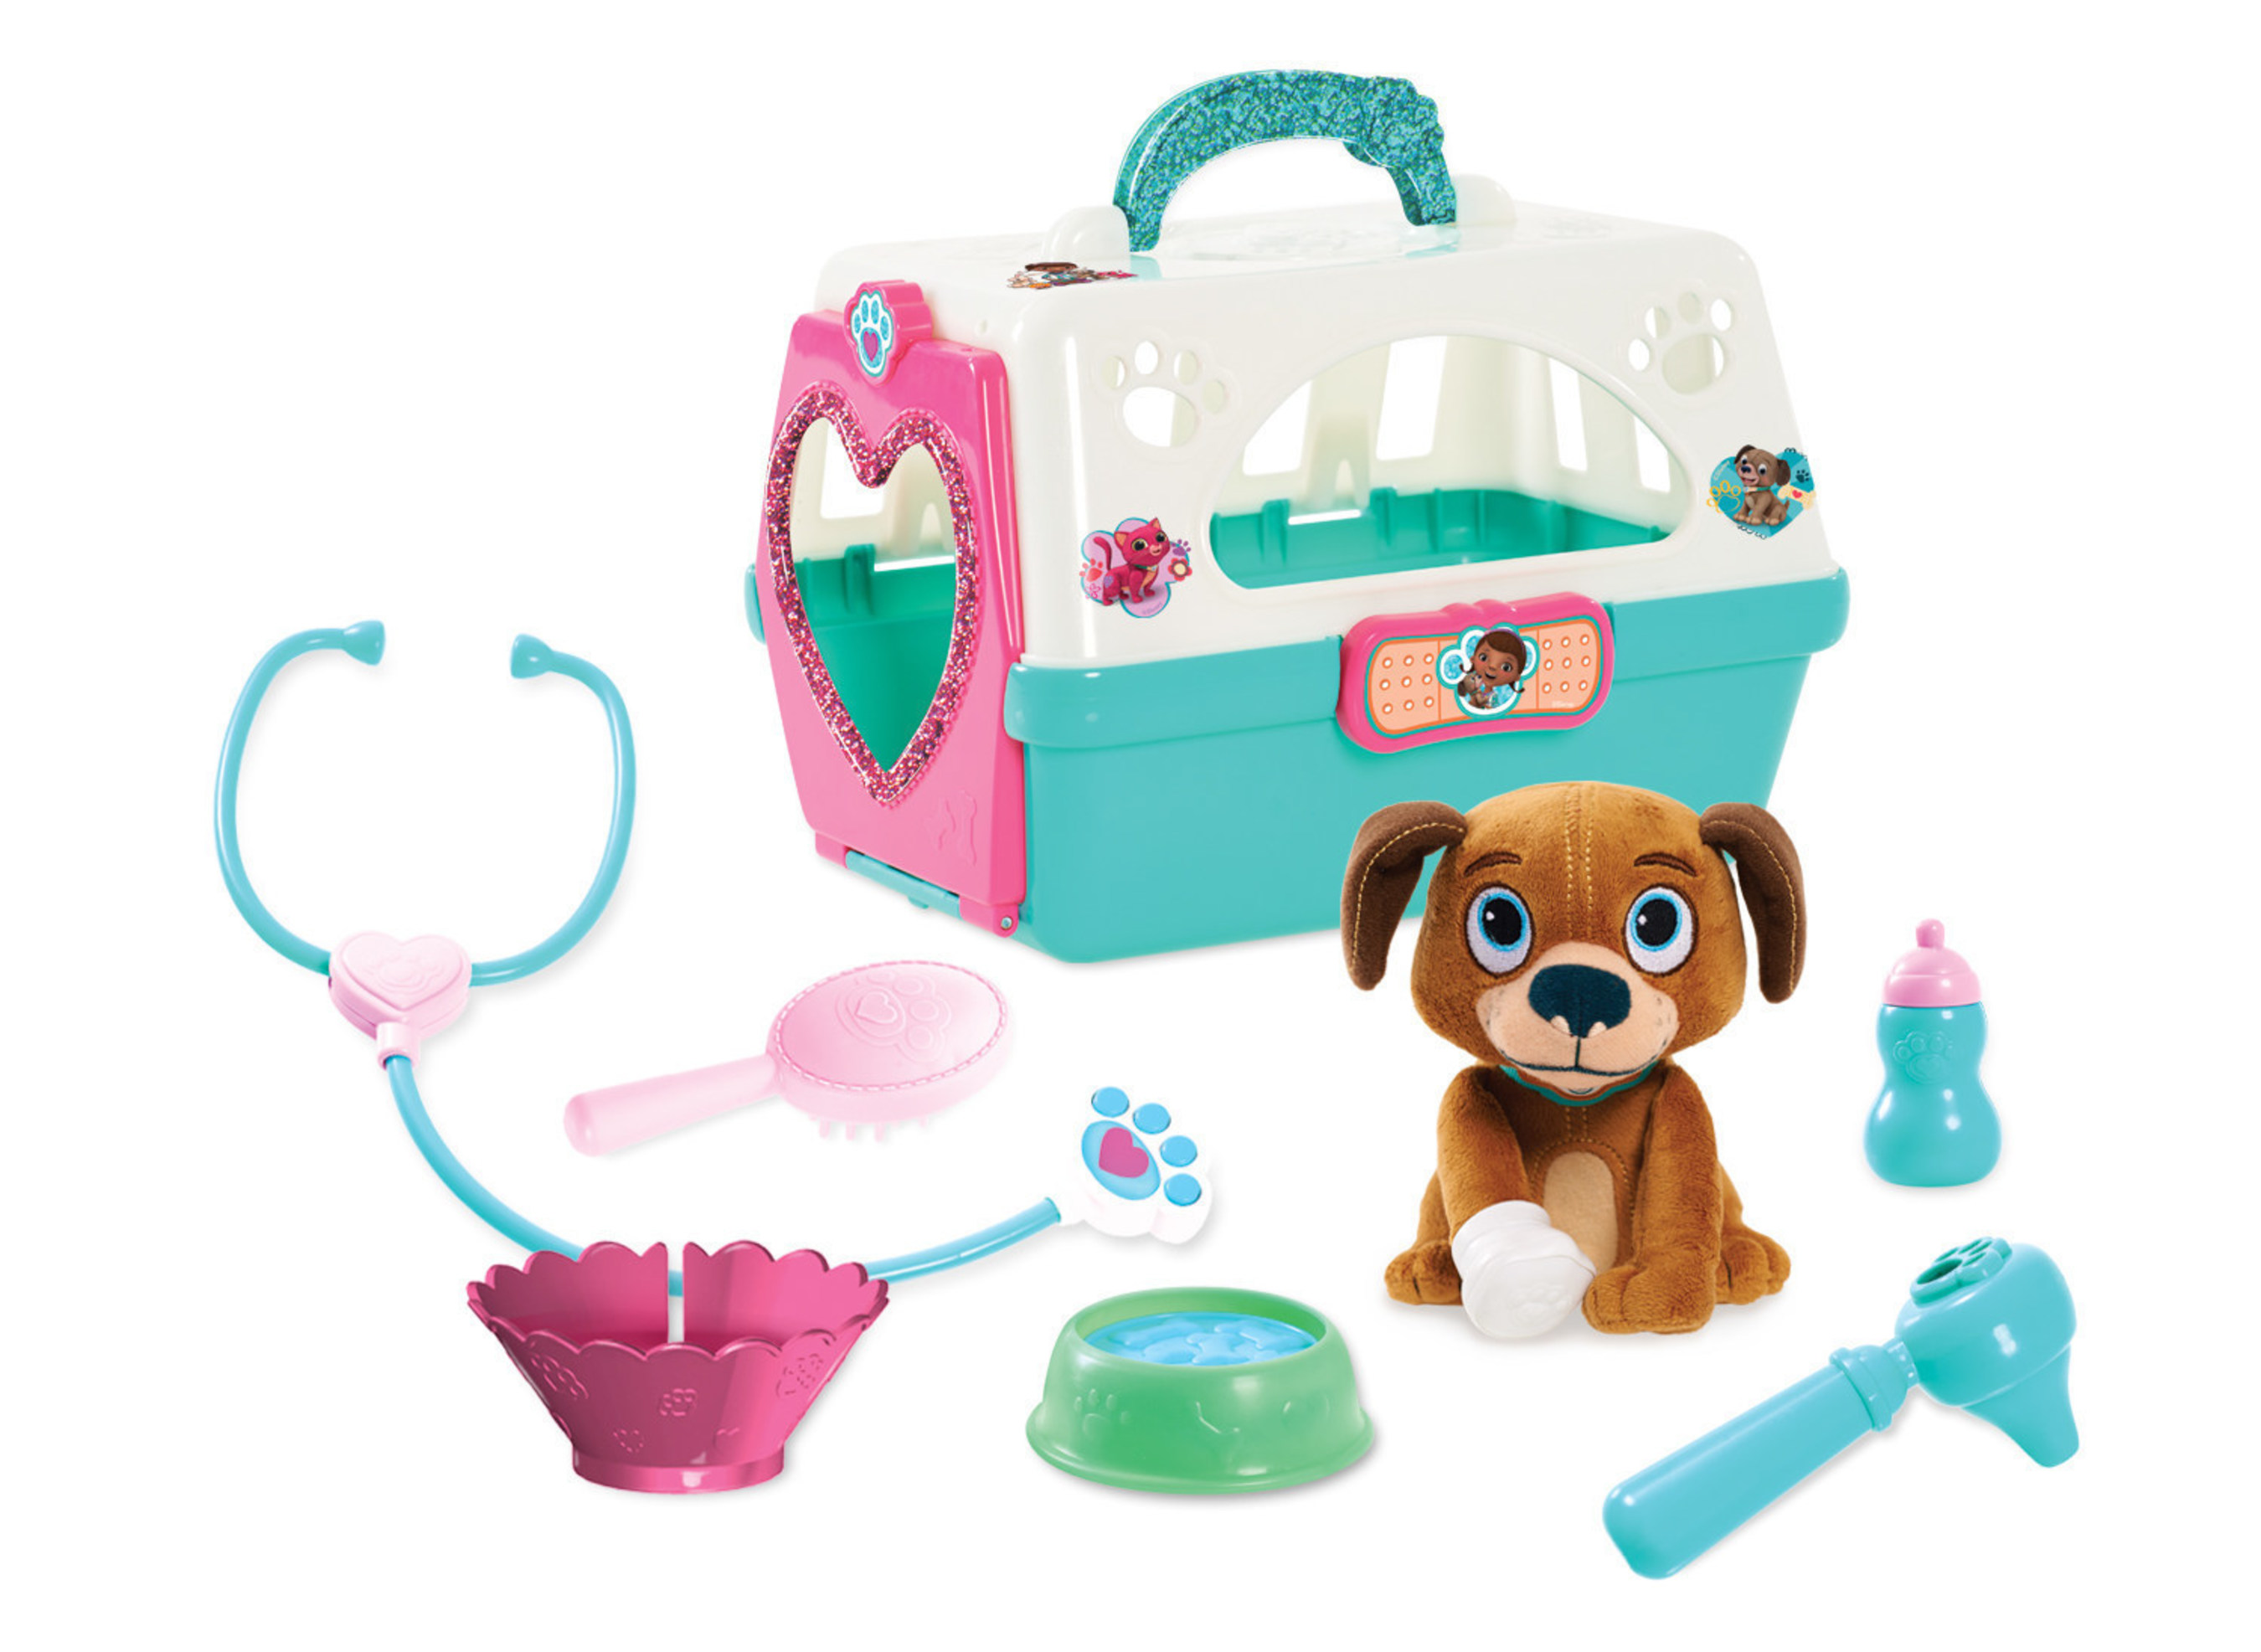 Doc McStuffins Toy Hospital On-The-Go Pet Carrier, available at BJ's Clubs and BJs.com.